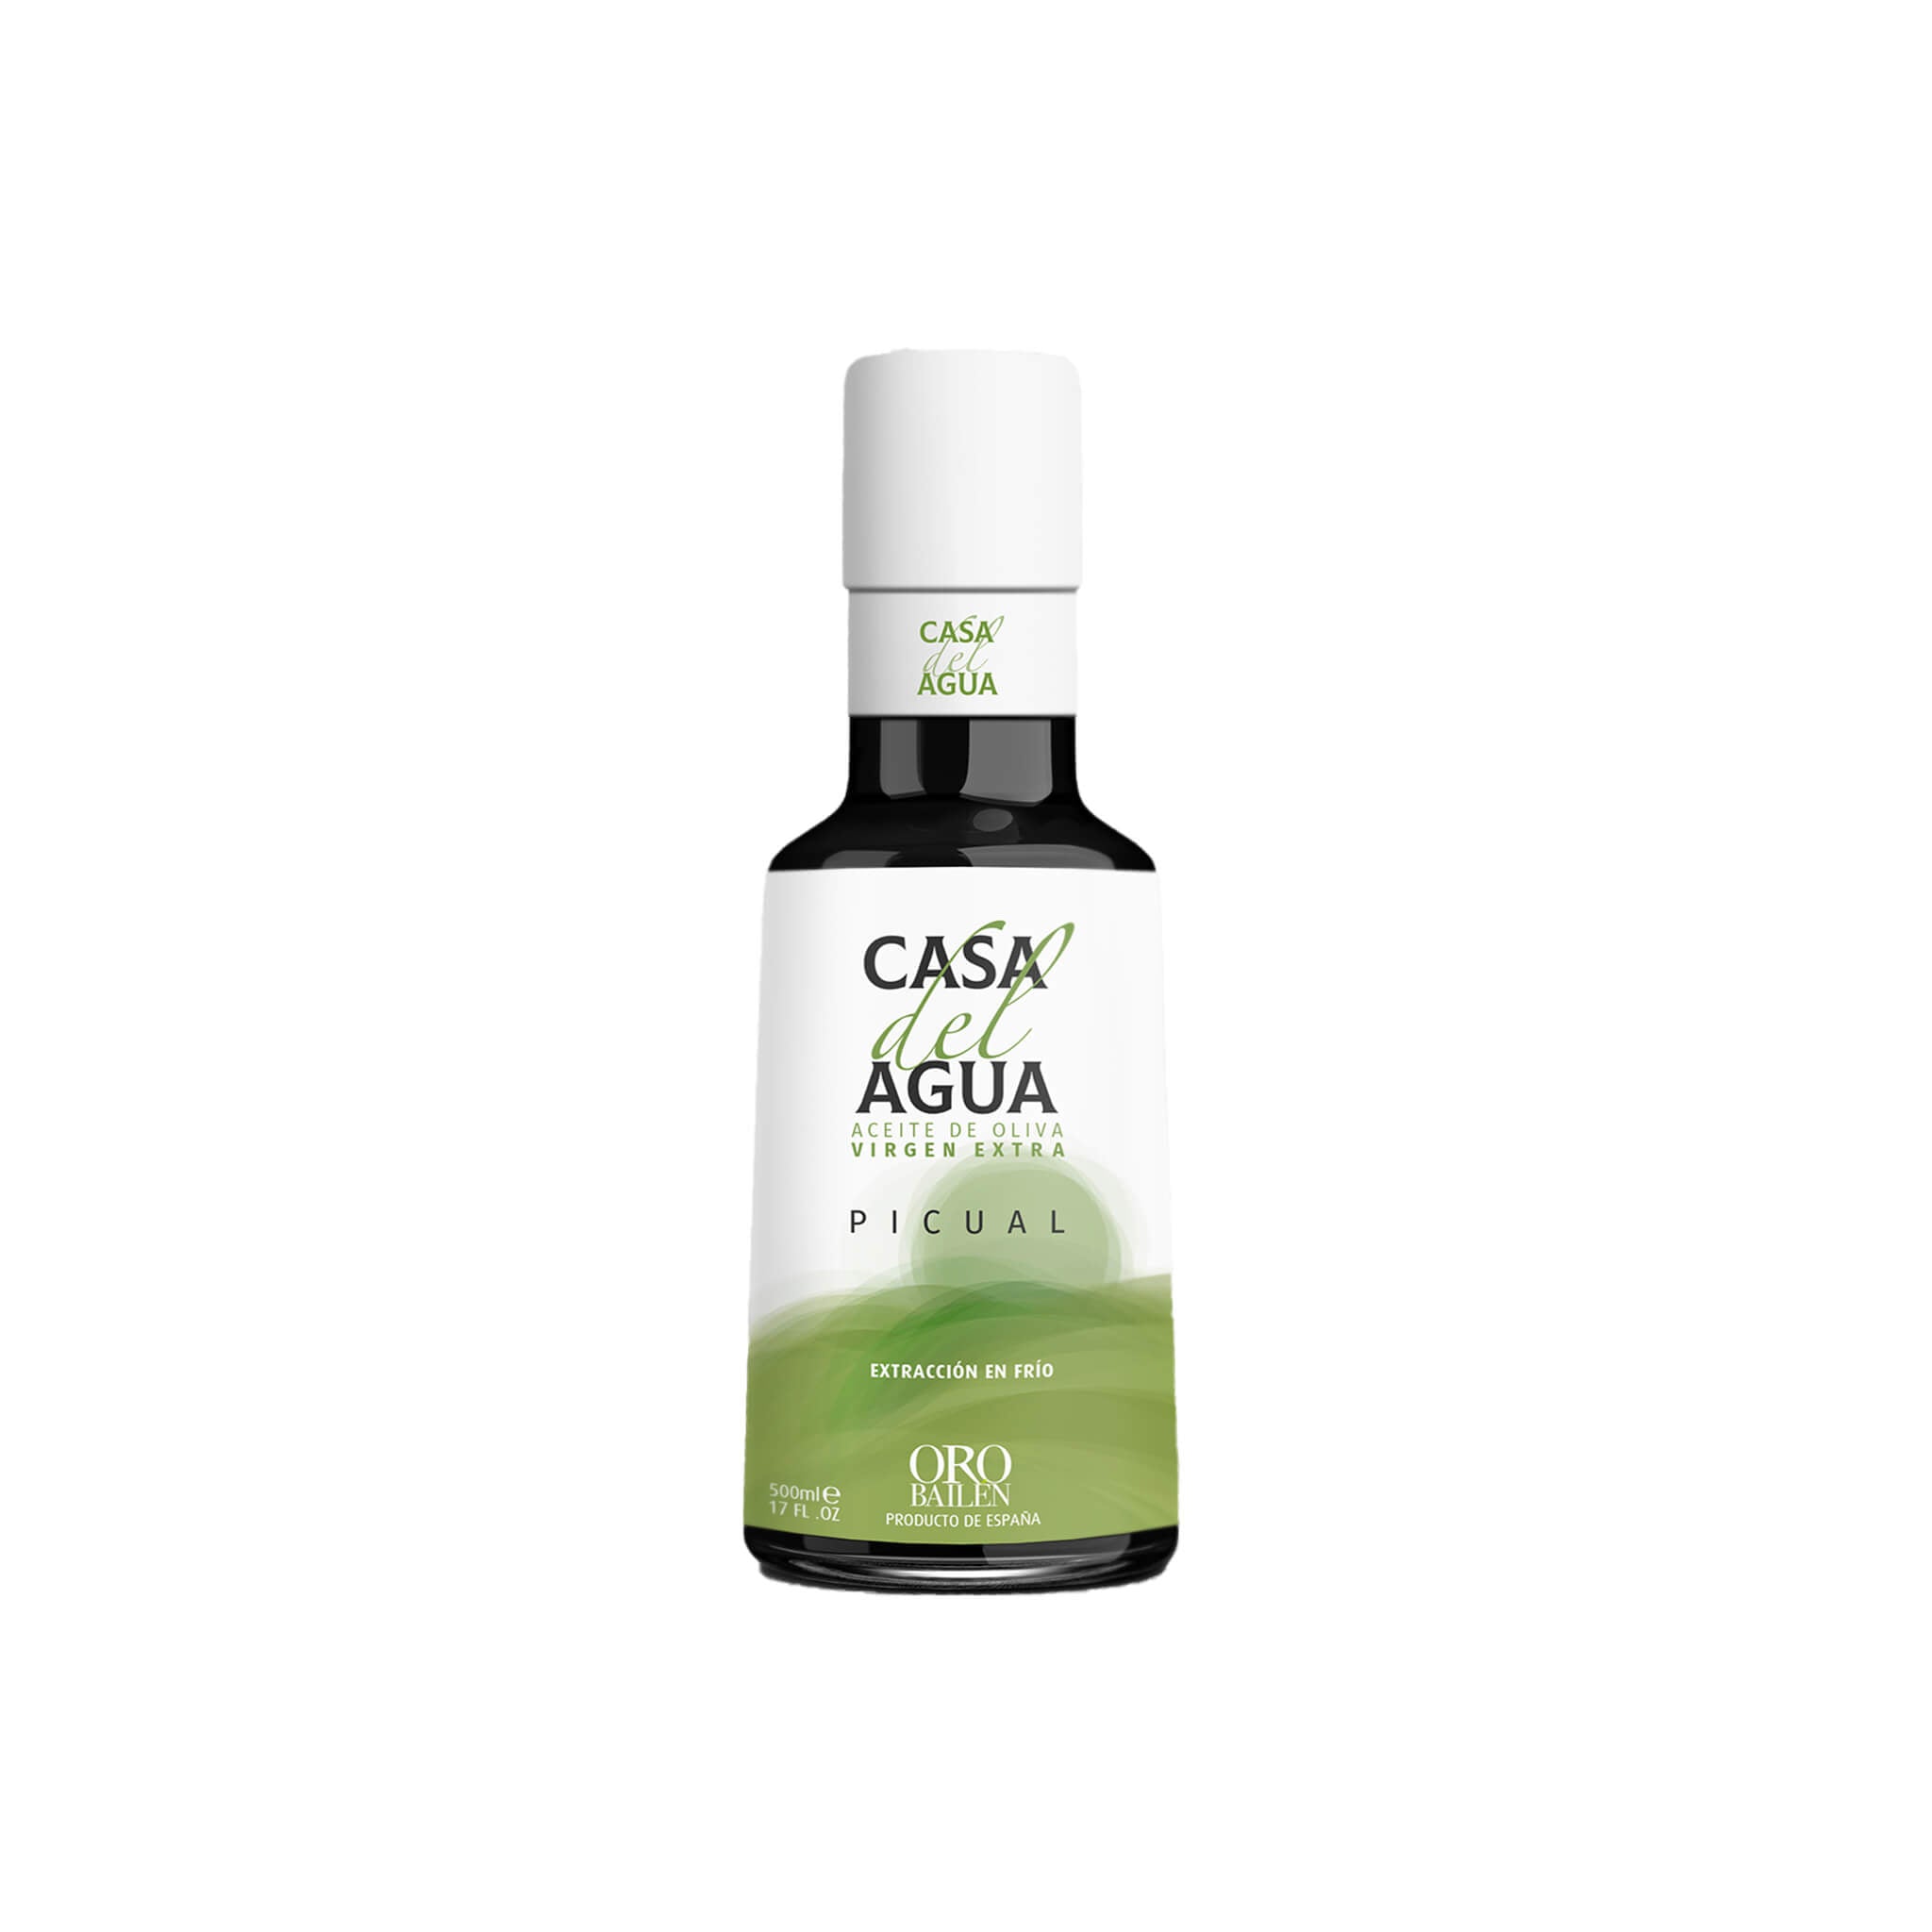 Casa del Agua Picual Extra Virgin Olive Oil 500ml buy the best olive oil online uk at the Artisan Olive Oil Company